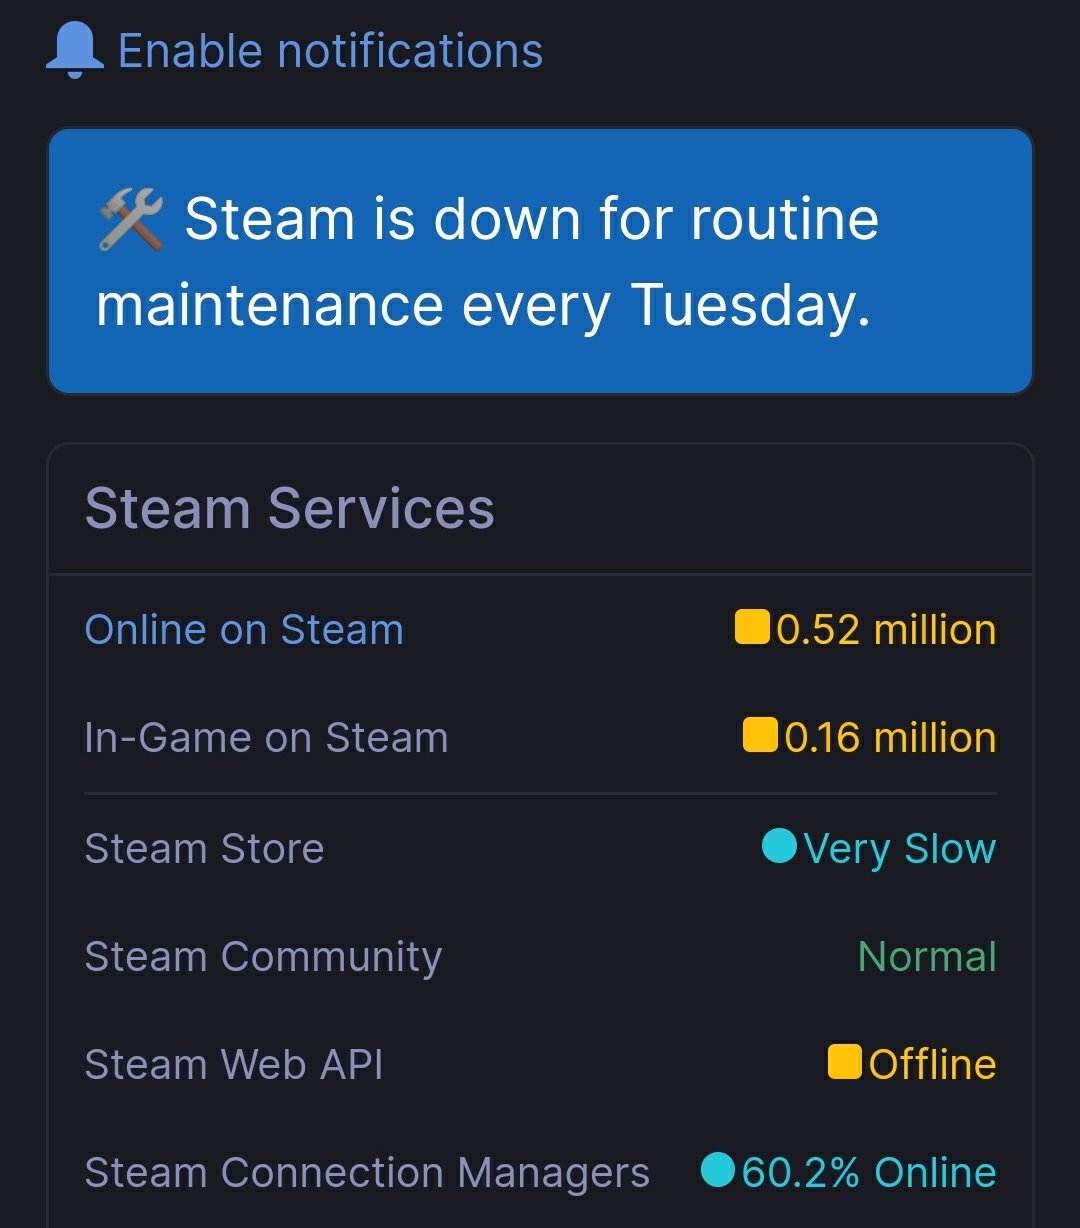 Steam is down every tuesday фото 1